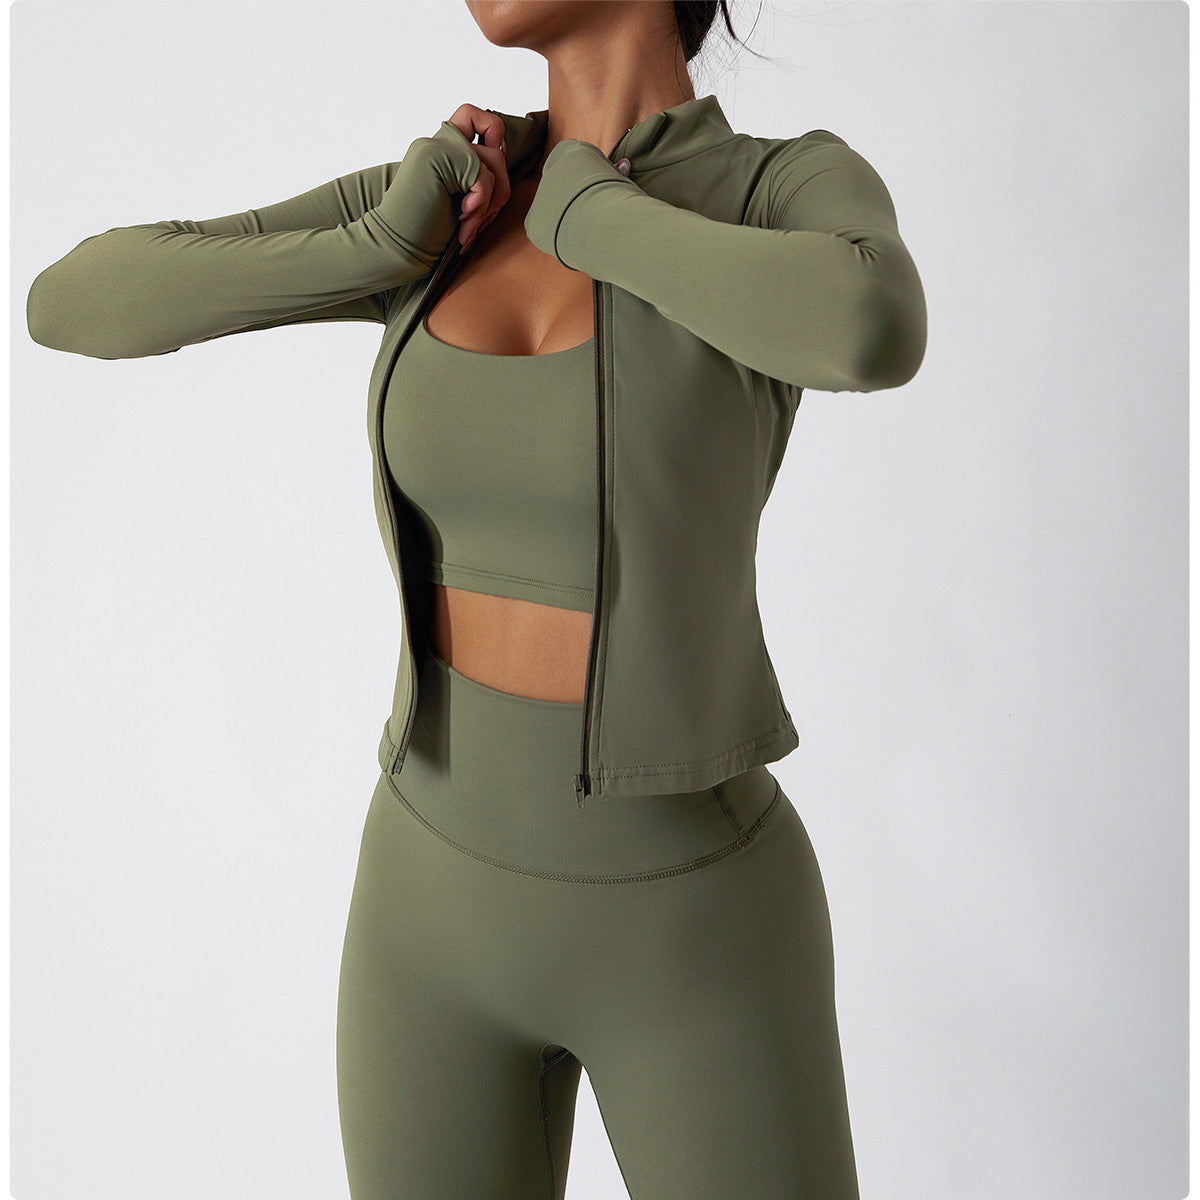 
                  
                    Nude Feel Yoga Clothes Women Autumn Winter Zipper Long Sleeved Workout Clothes Suit Slim Fit Running Workout Sportswear
                  
                